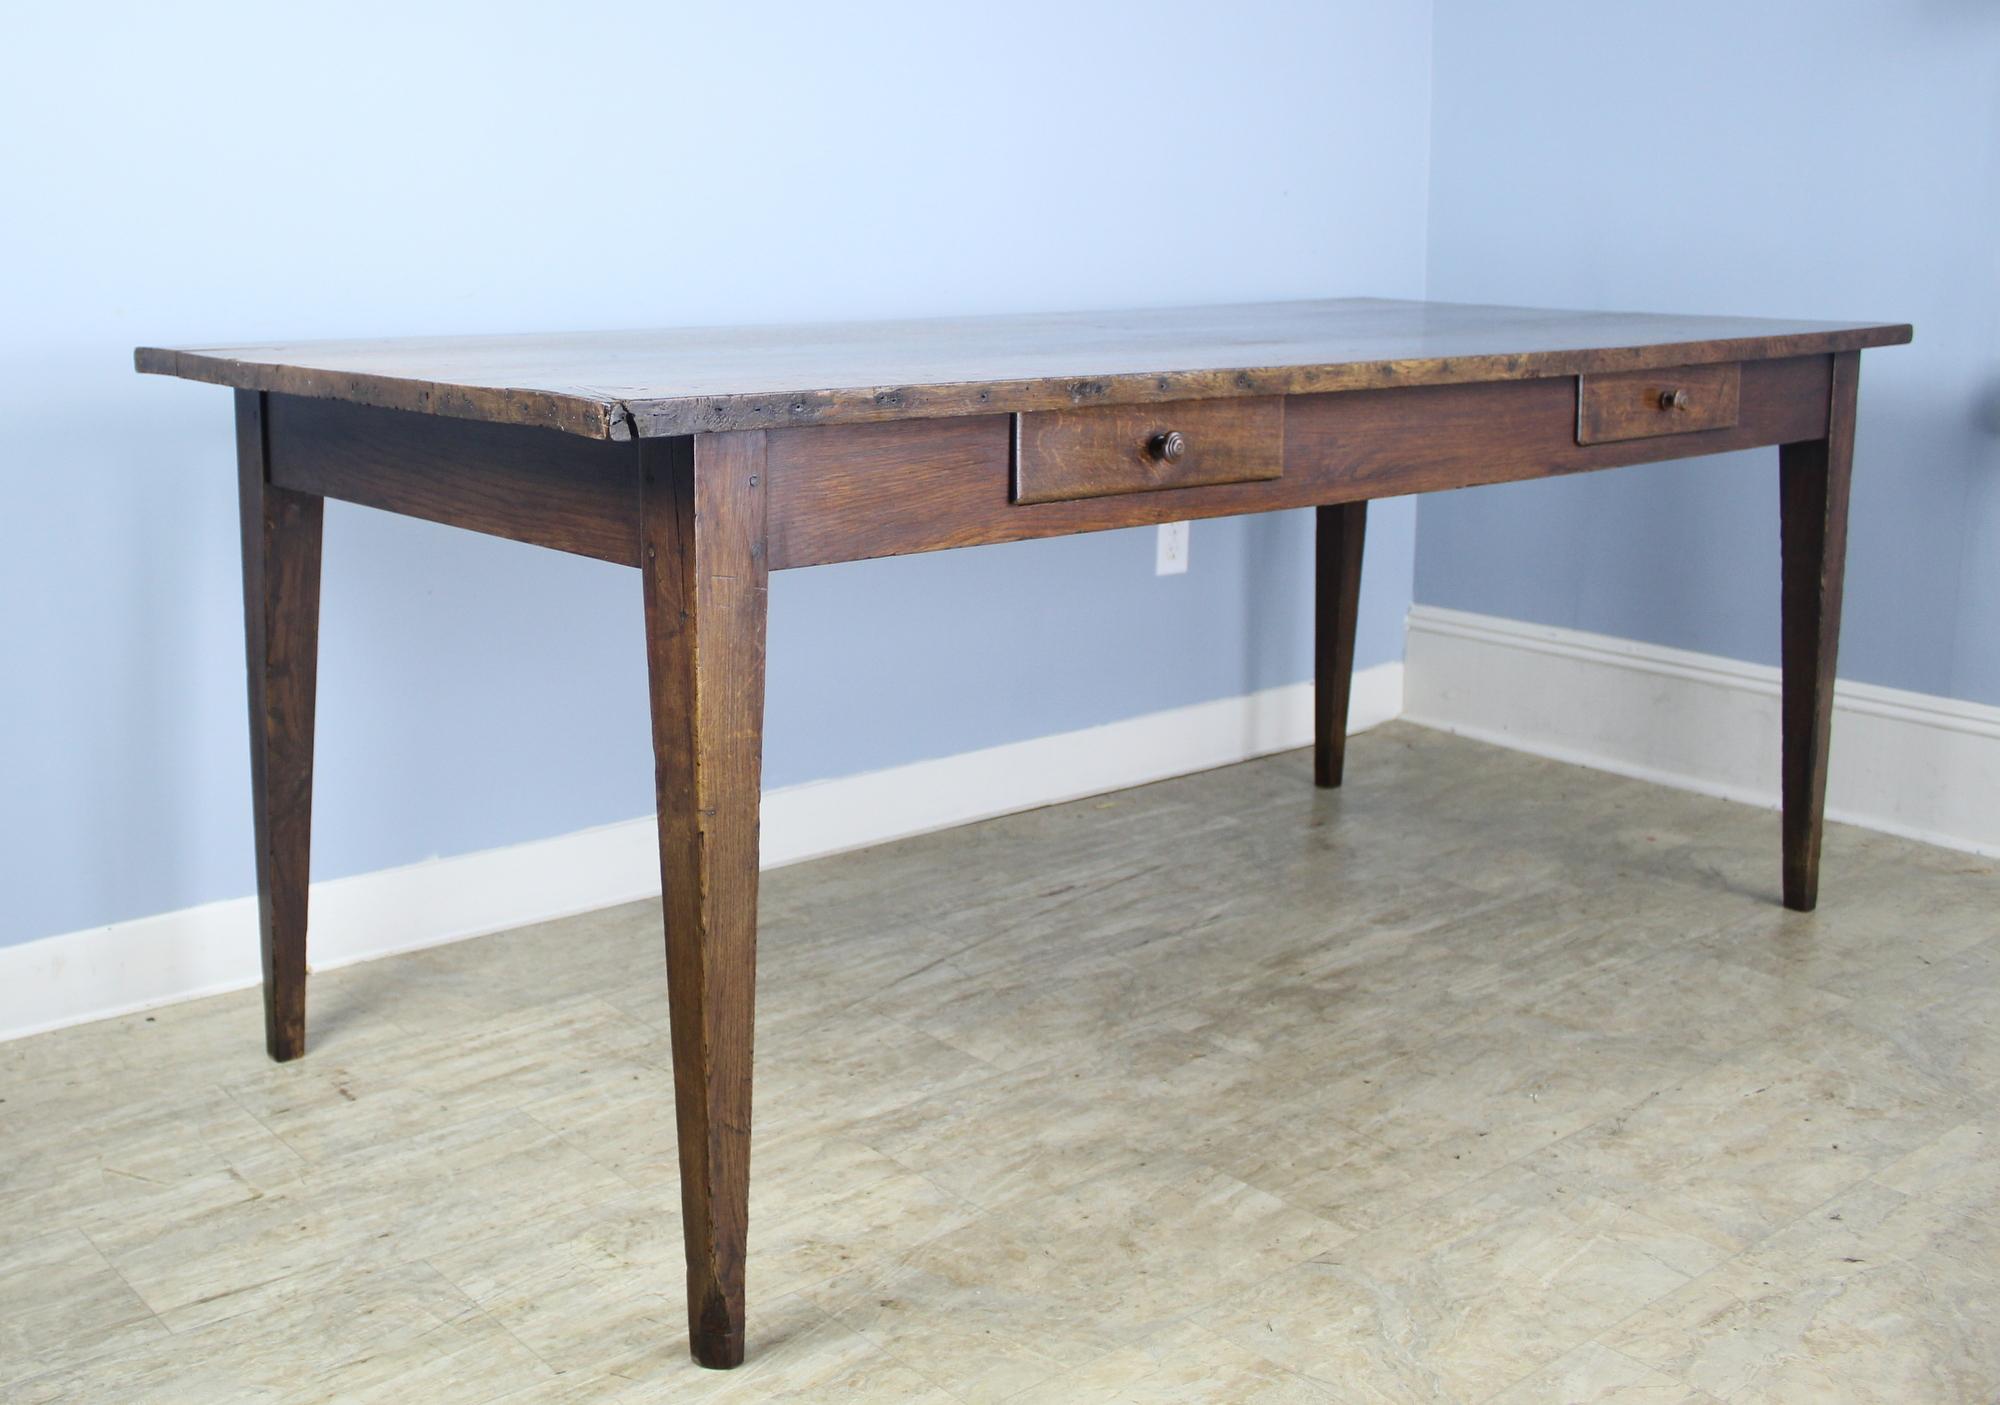 A country oak farm table with nice decorative details dramatic natural grain and knotholes and two drawers on one side. Solid and sturdy with moderately tapered legs and deep rich color and patina. Apron height is good for knees at 25